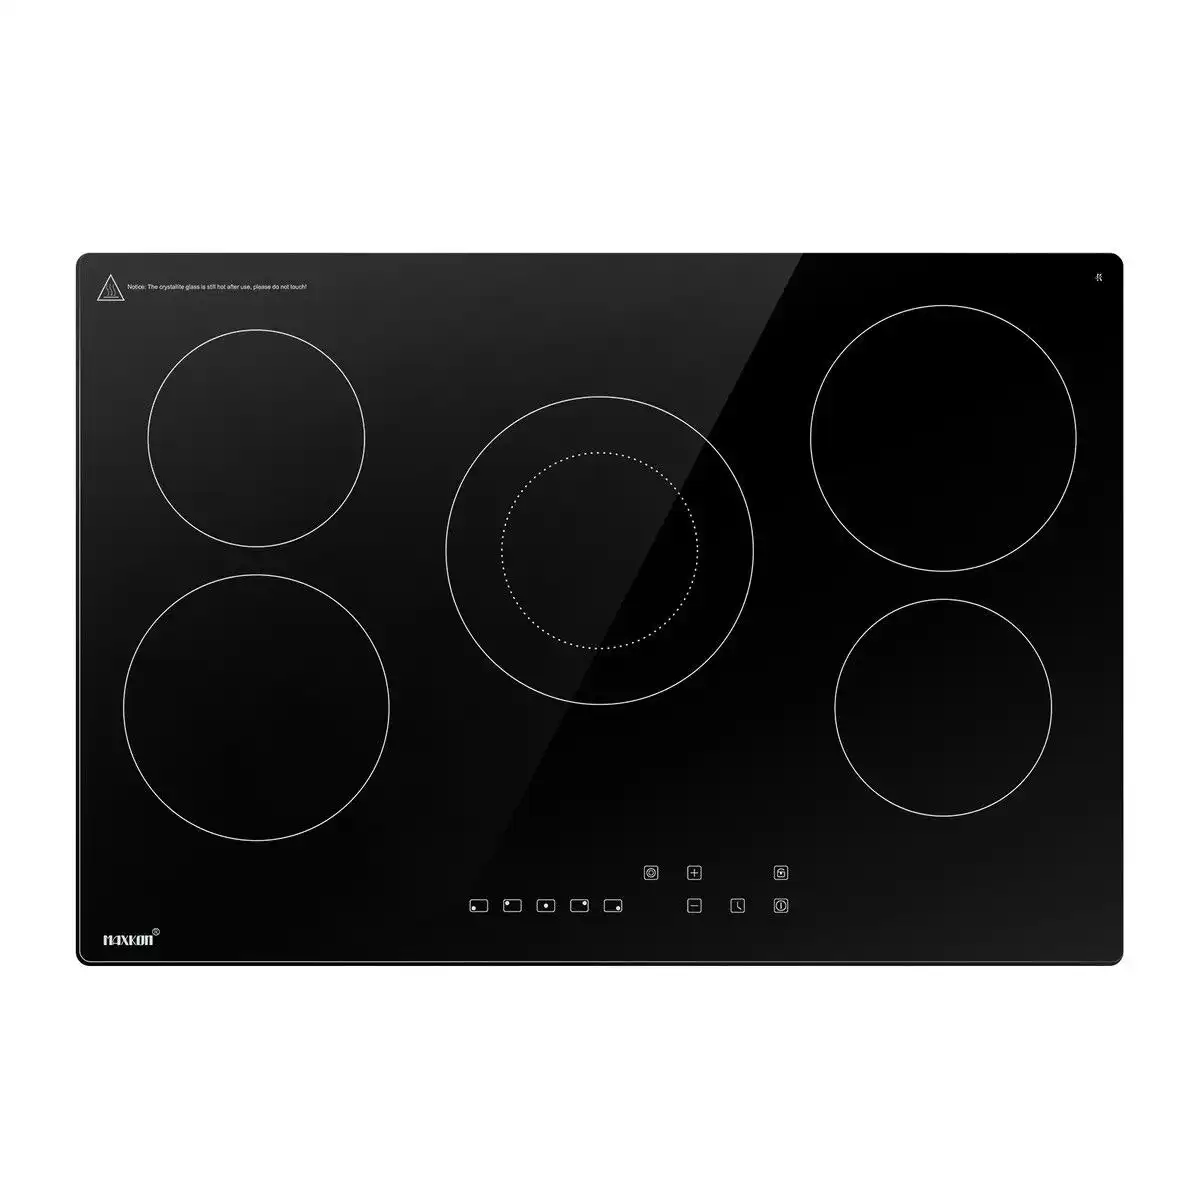 Maxkon Ceramic Cooktop Stove Electric Cooker Hob Glass Top 5 Burners 6 Zones Touch Control Built In